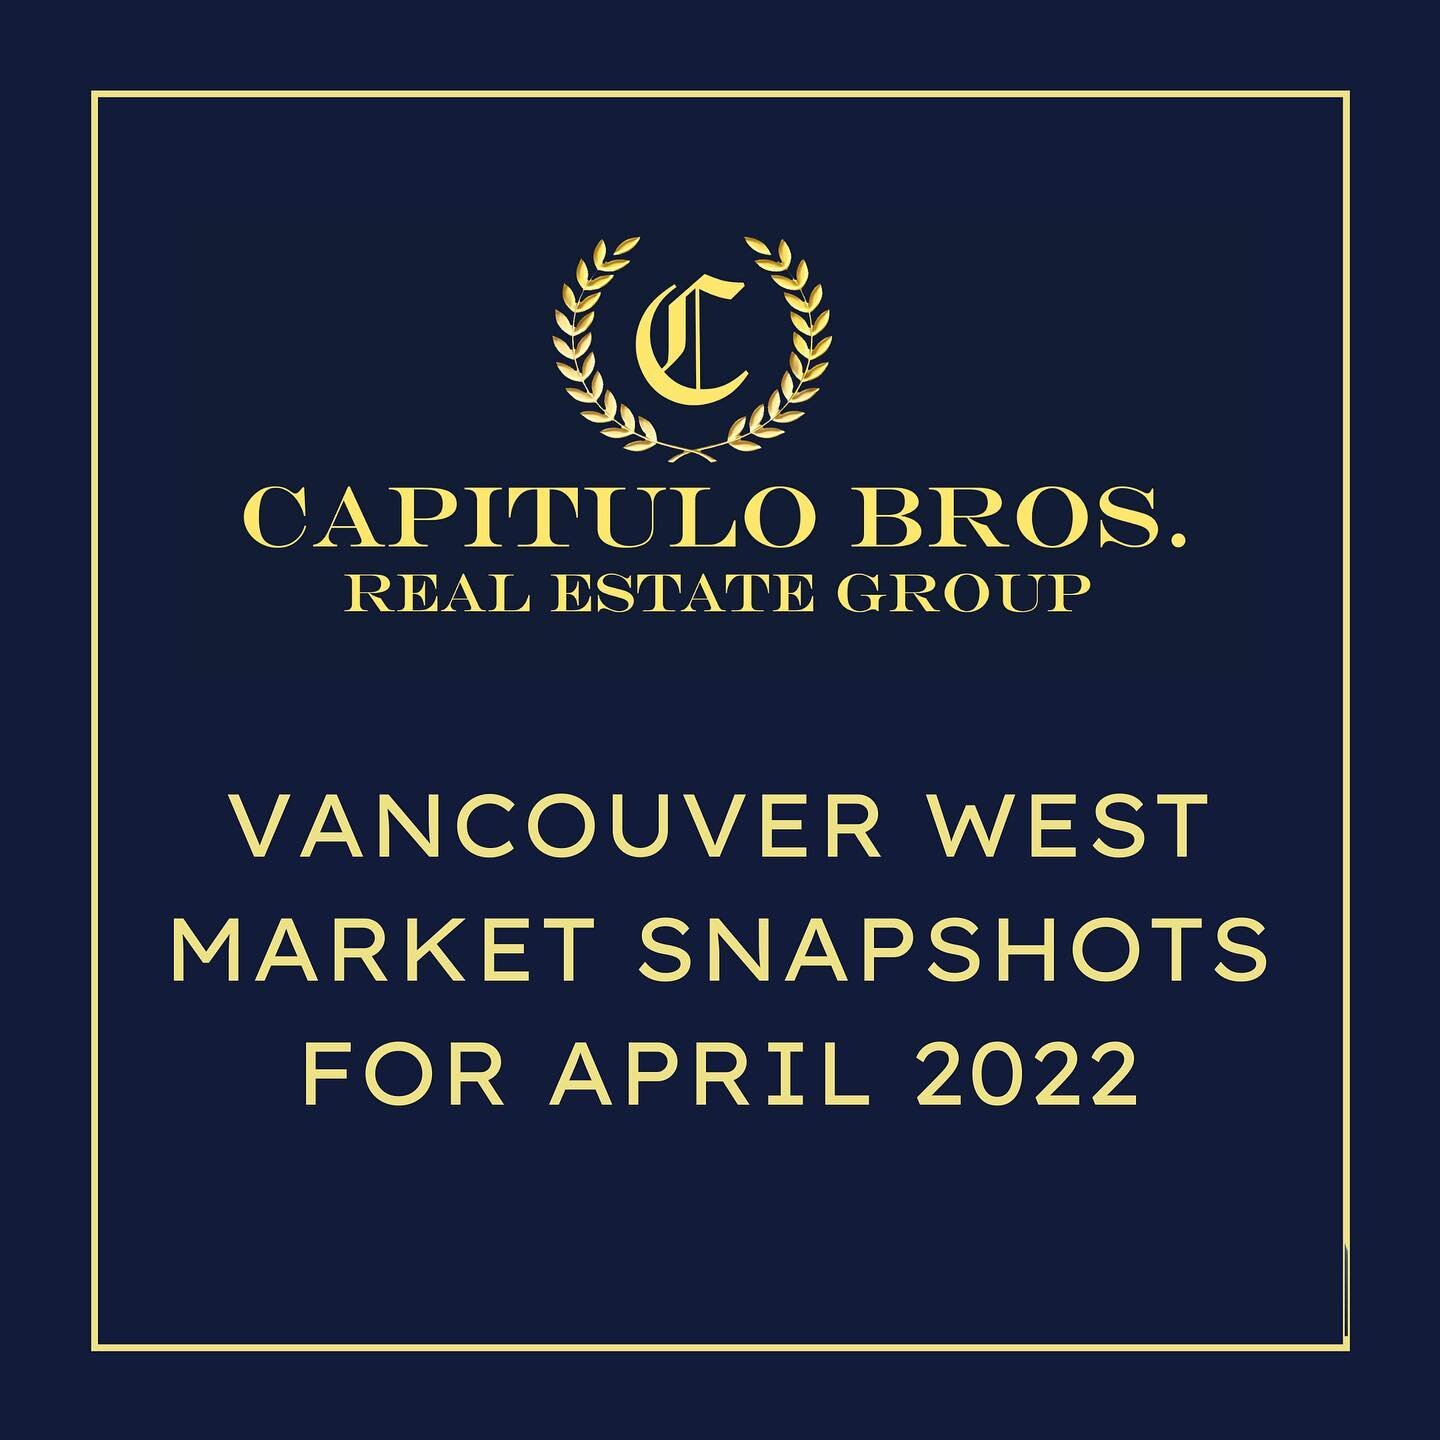 Hi Vancouver ⭐

Vancouver Statistics and Market Performance: April 2022

The month of April 2022 saw the sales of Vancouver West Detached Homes, Vancouver West Apartments, and Vancouver East Apartments drop by almost 25%. However, all property types 